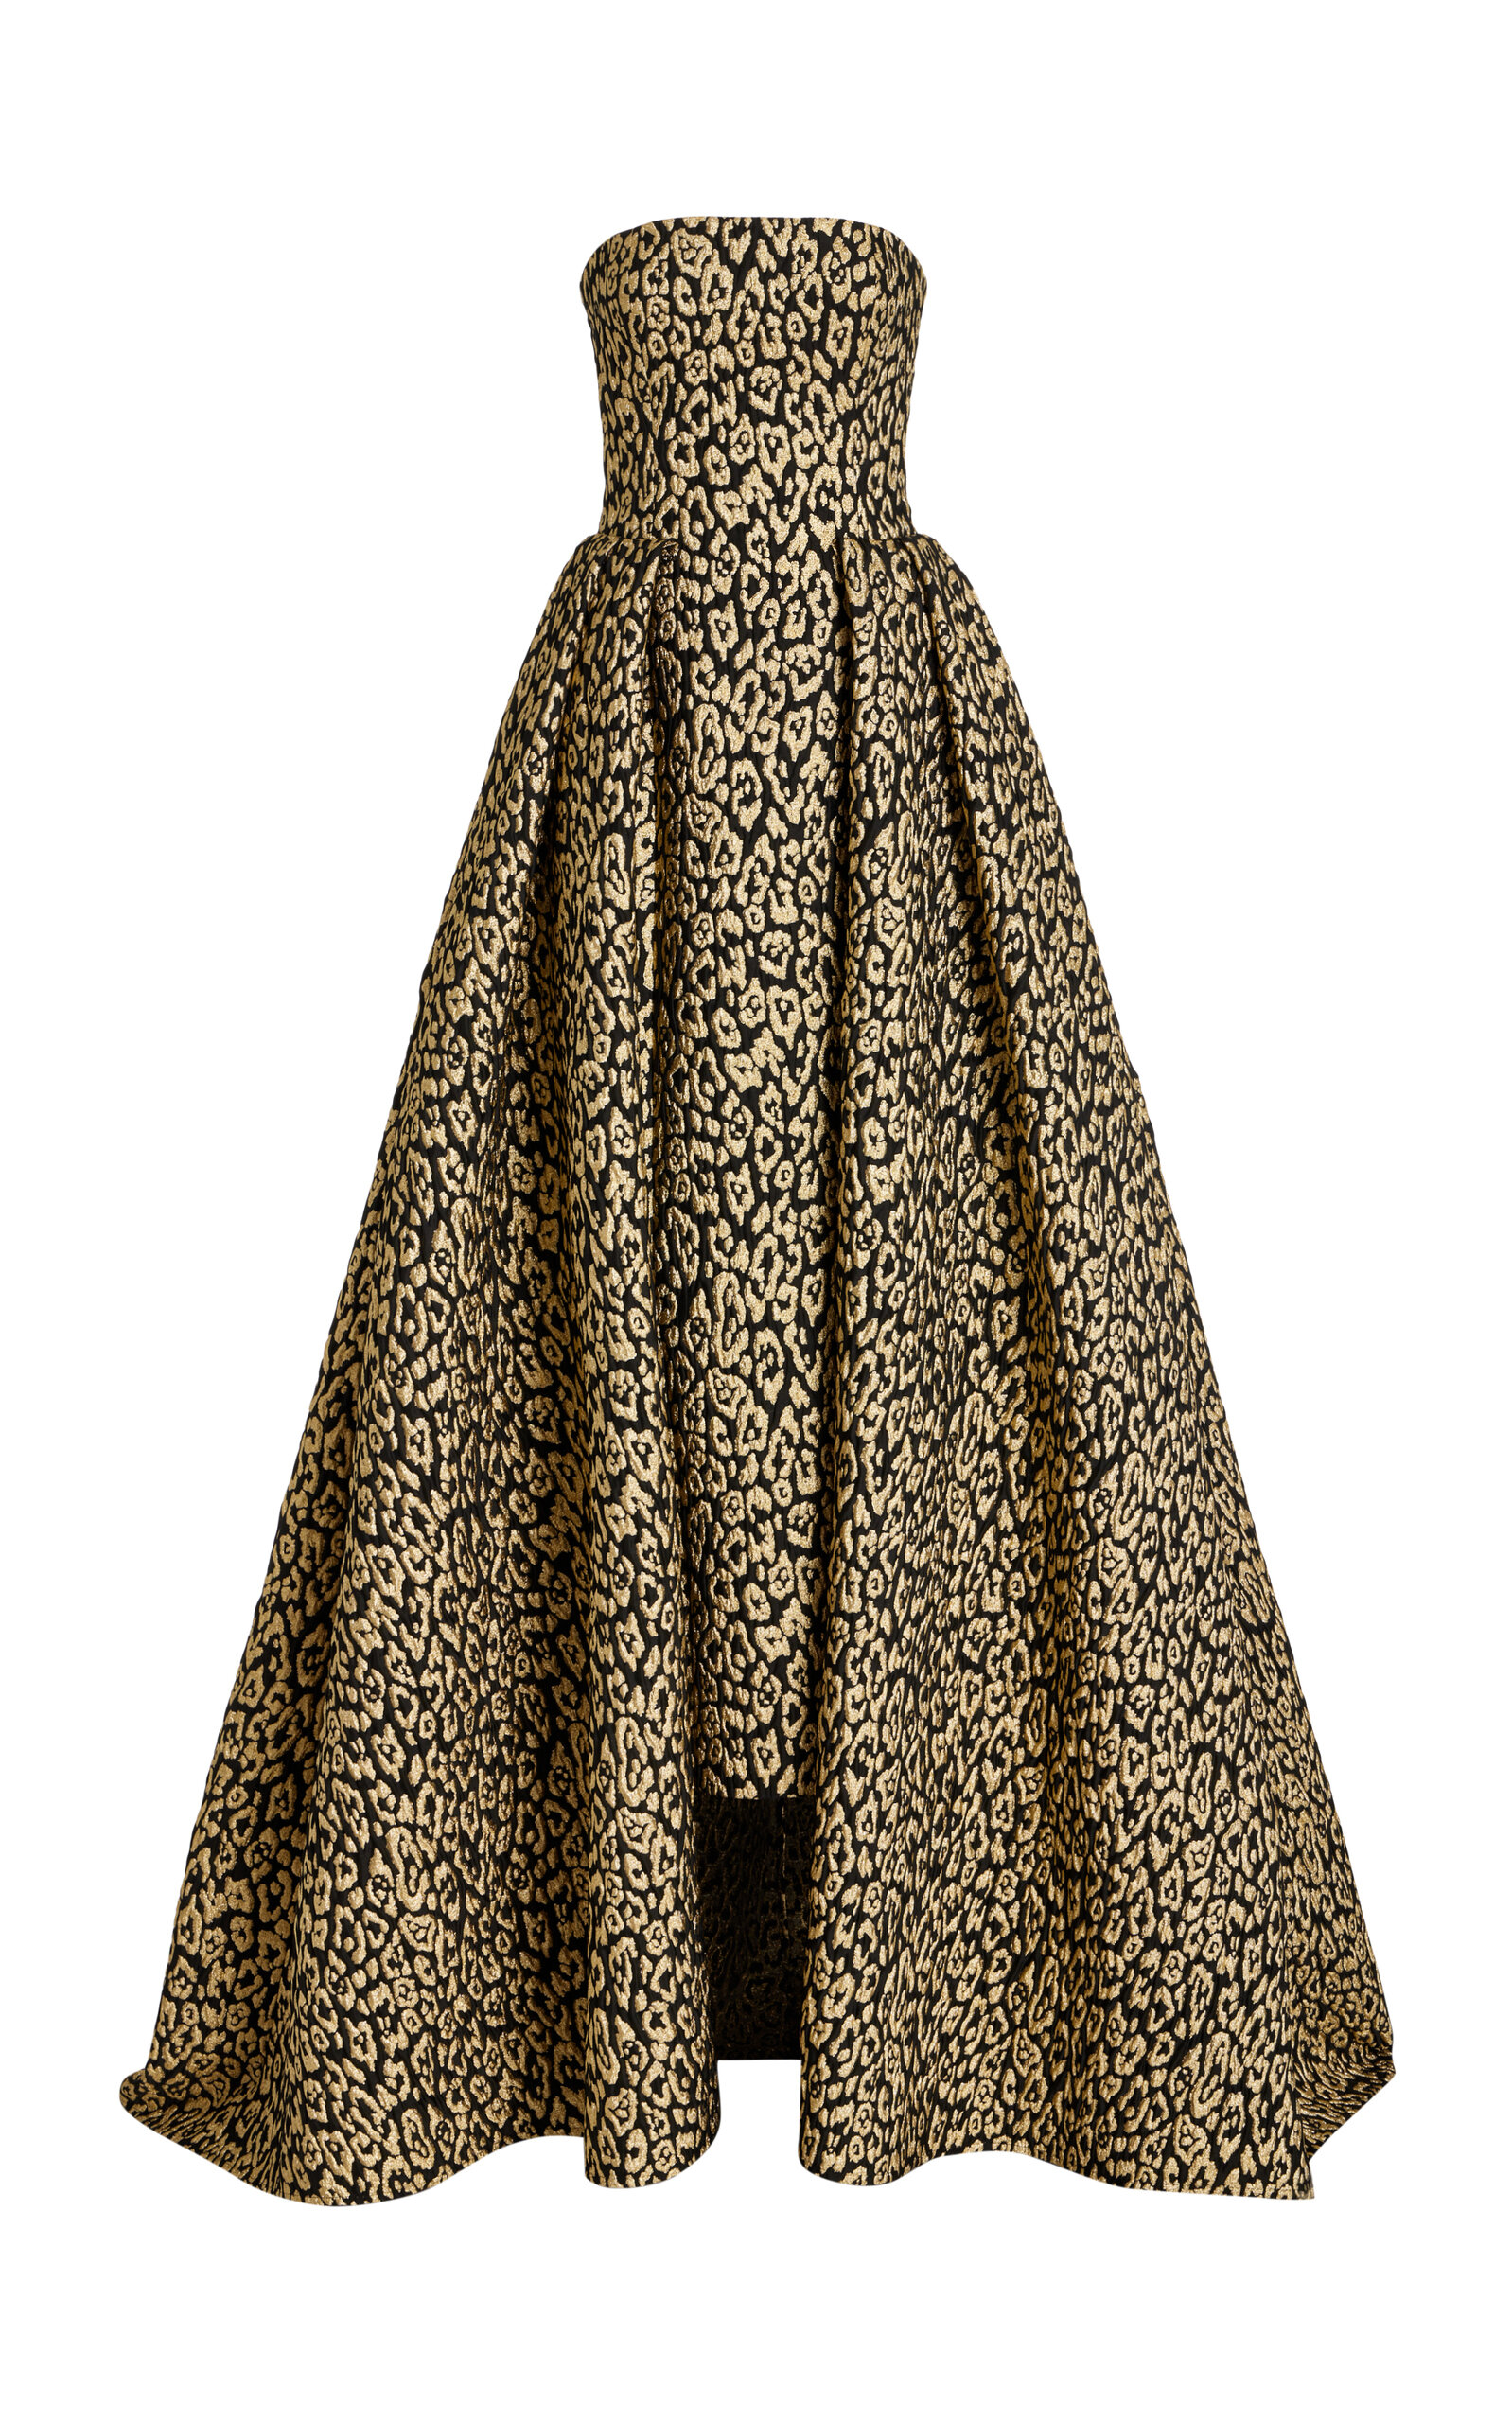 CAROLINA HERRERA STRAPLESS LEOPARD GOWN WITH ATTACHED OVERSKIRT